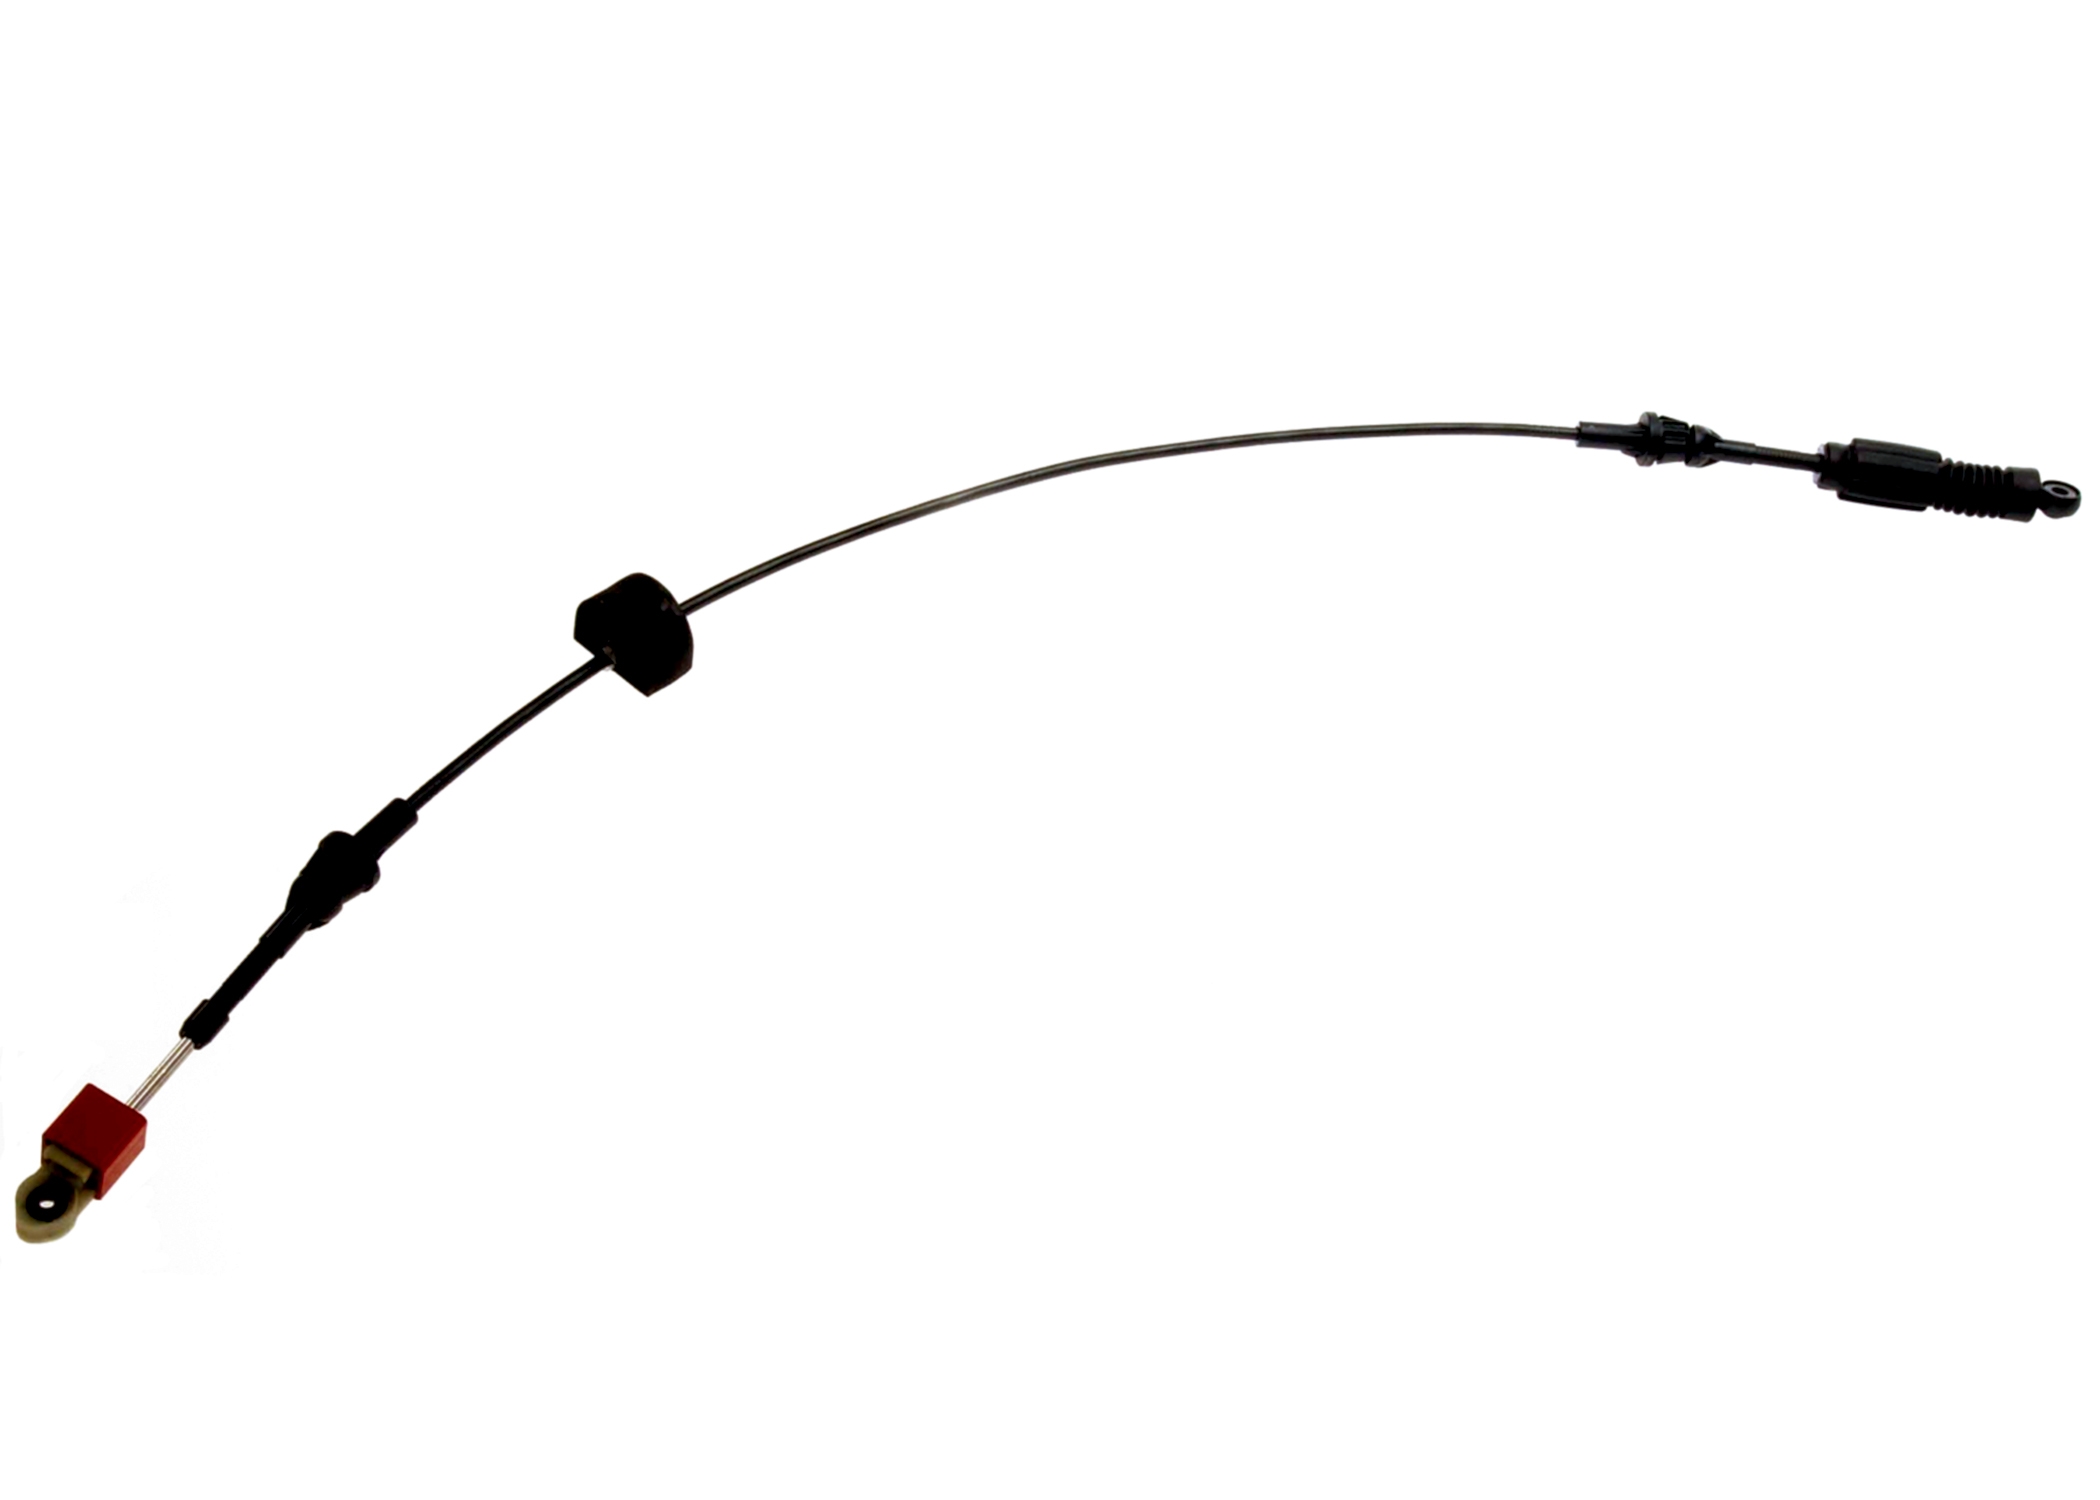 GM GENUINE PARTS - Automatic Transmission Shifter Cable - GMP 12561688